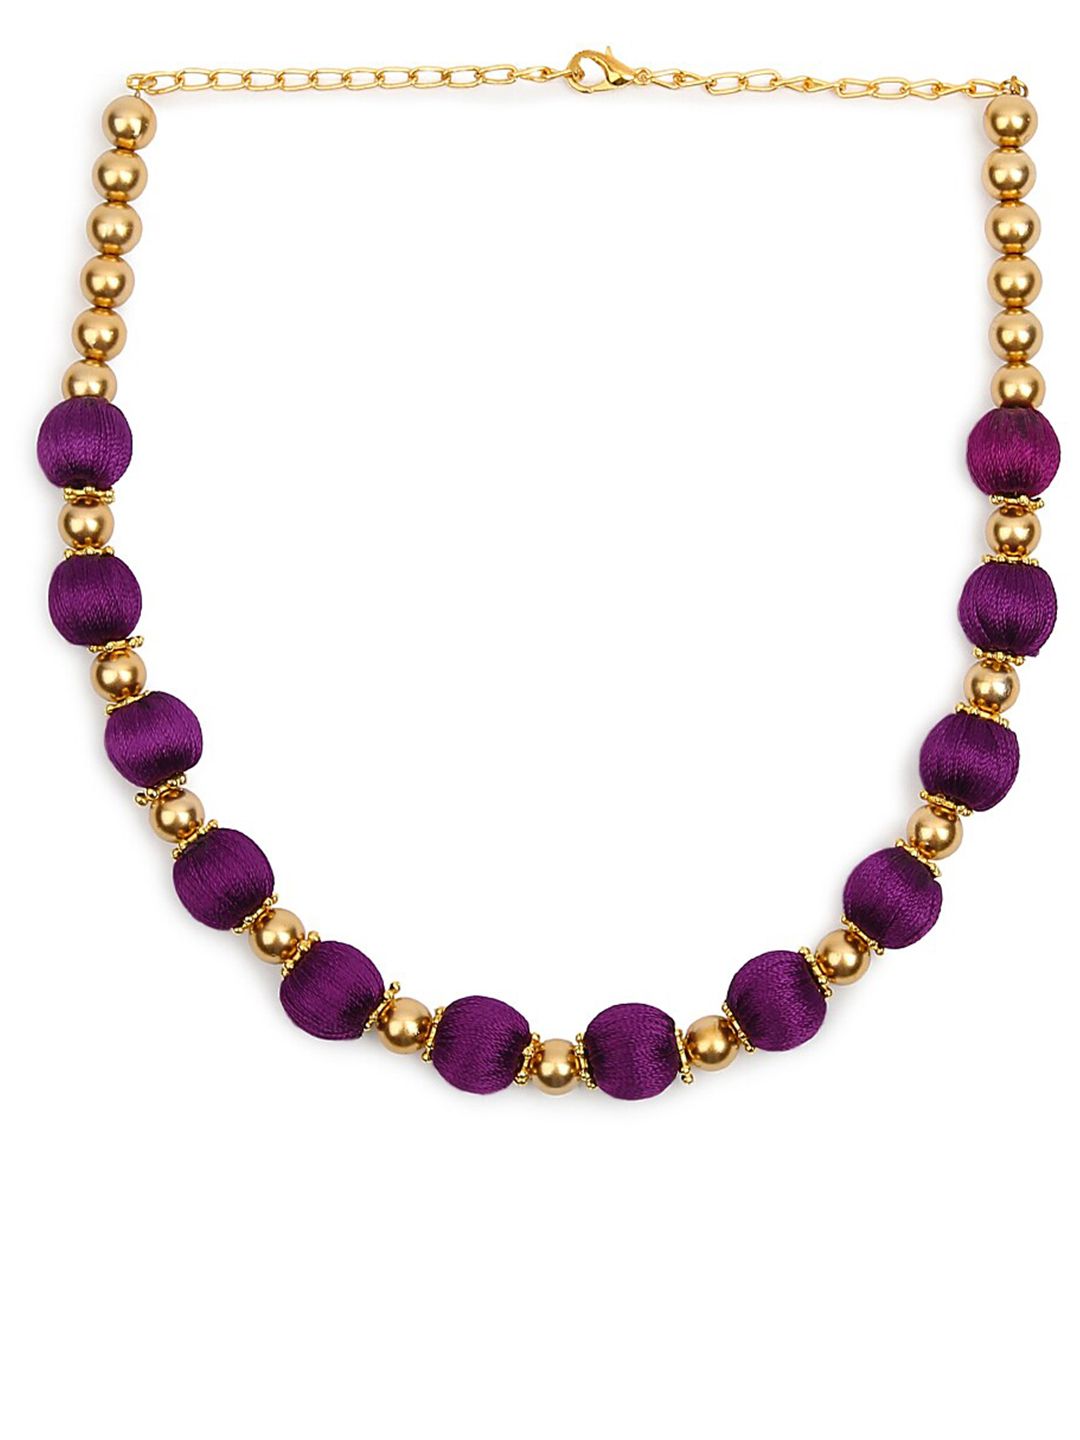 AKSHARA Gold-Toned & Purple Choker Necklace Price in India